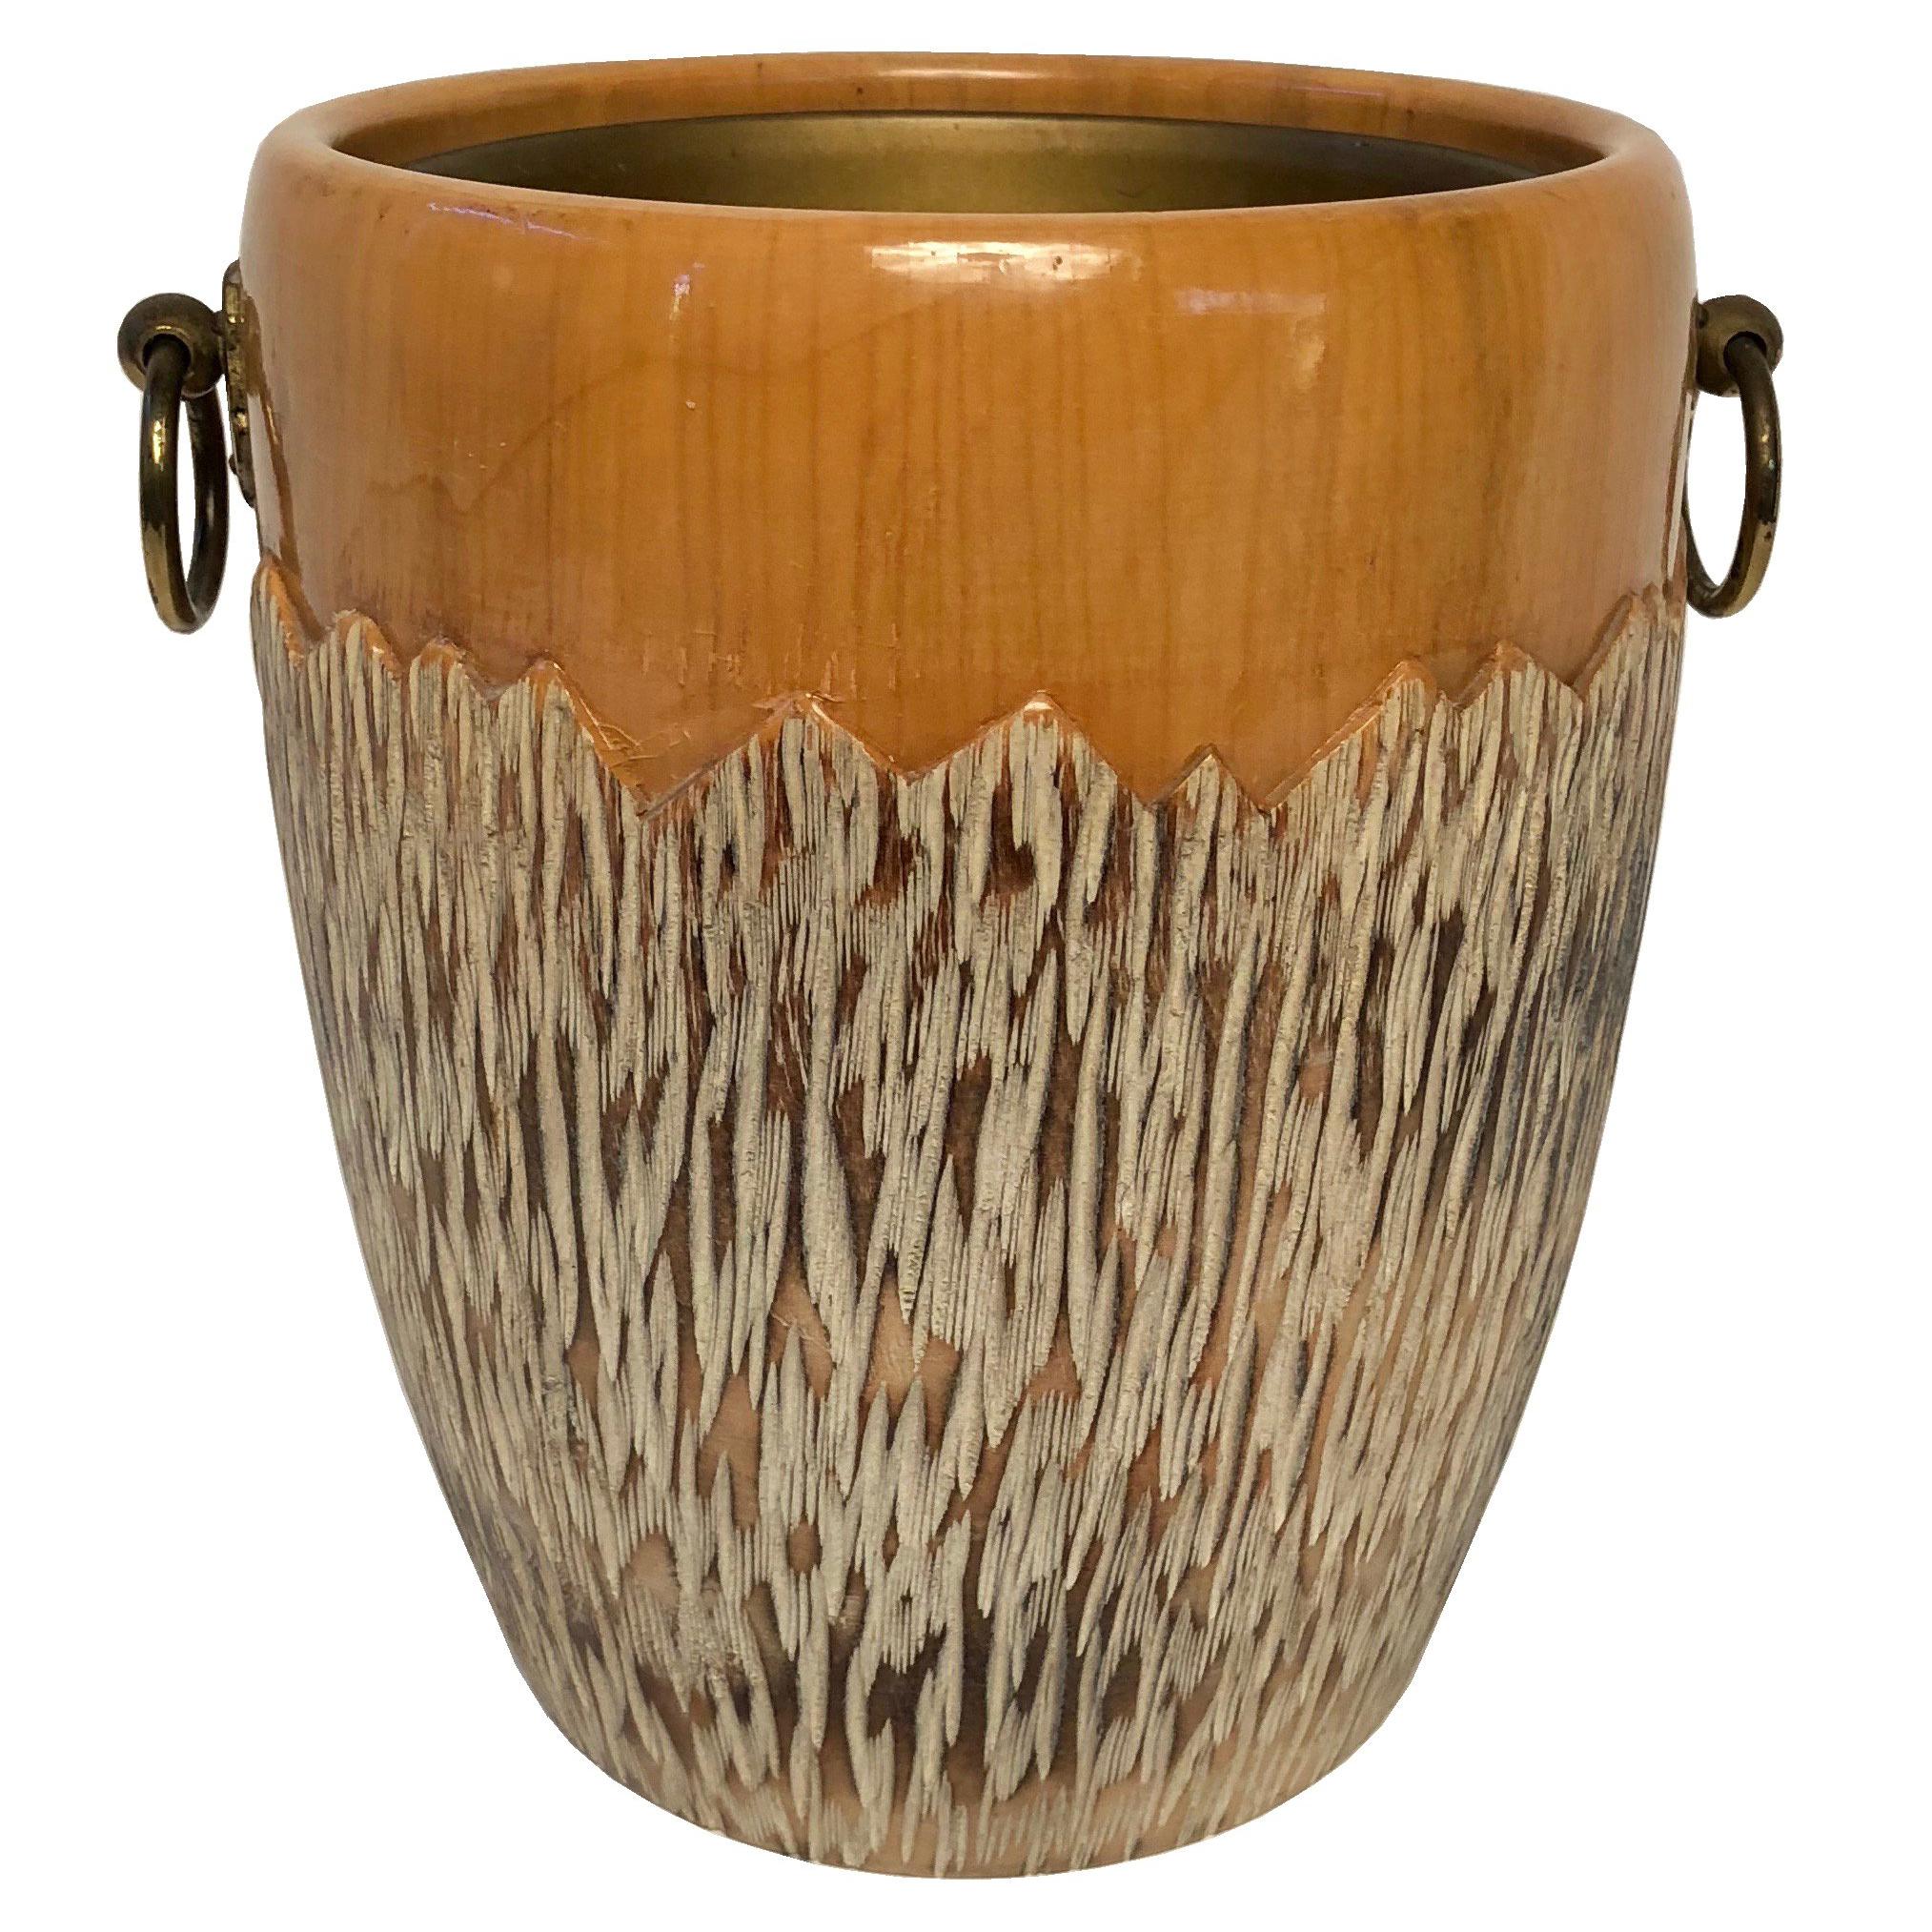 Aldo Tura Ice Bucket for Macabo Italia in Carved Wood and Brass, circa 1950